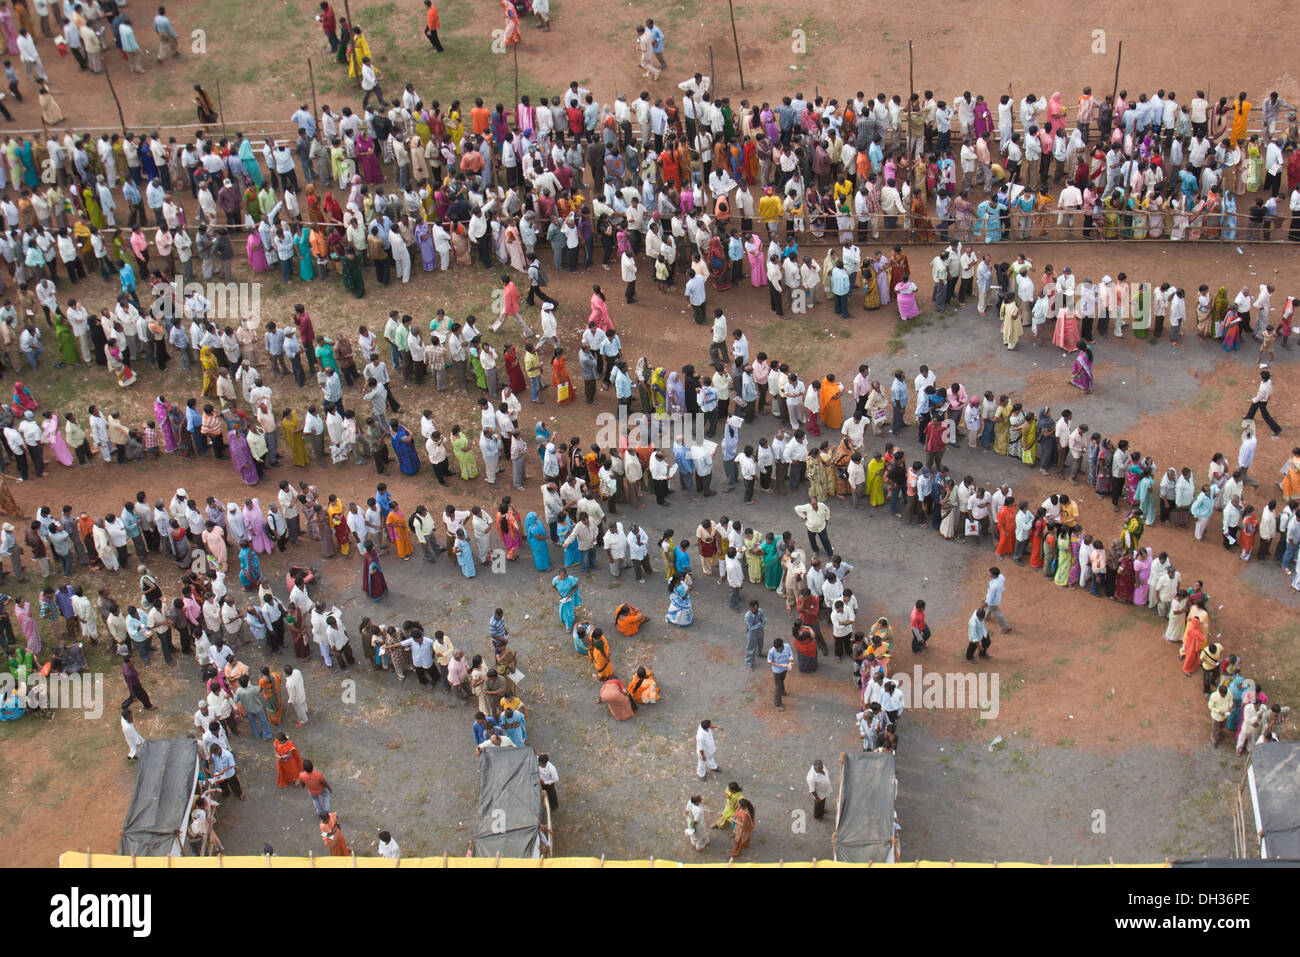 voters-in-queue-for-voting-at-election-polling-station-mumbai-maharashtra-DH36PE.jpg